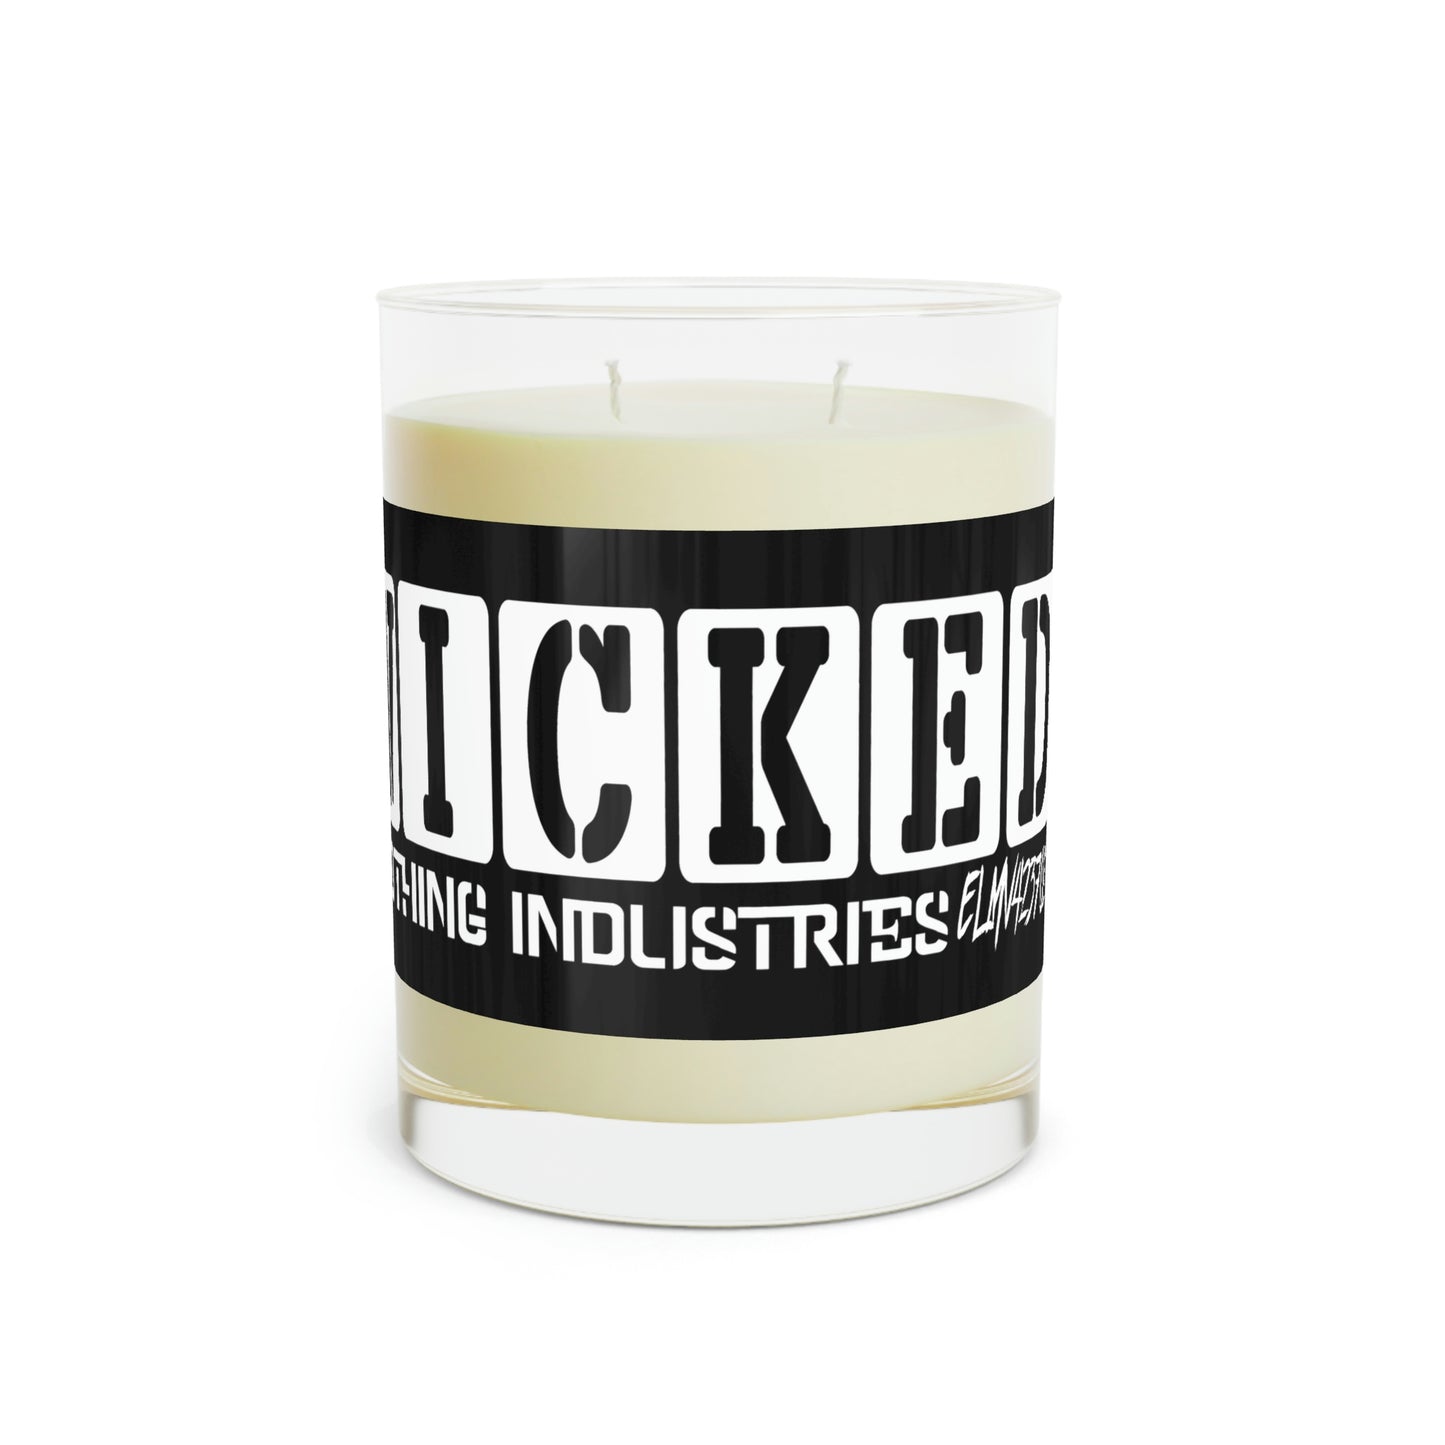 Wicked ELMV423702 /Scented Candle, 11oz